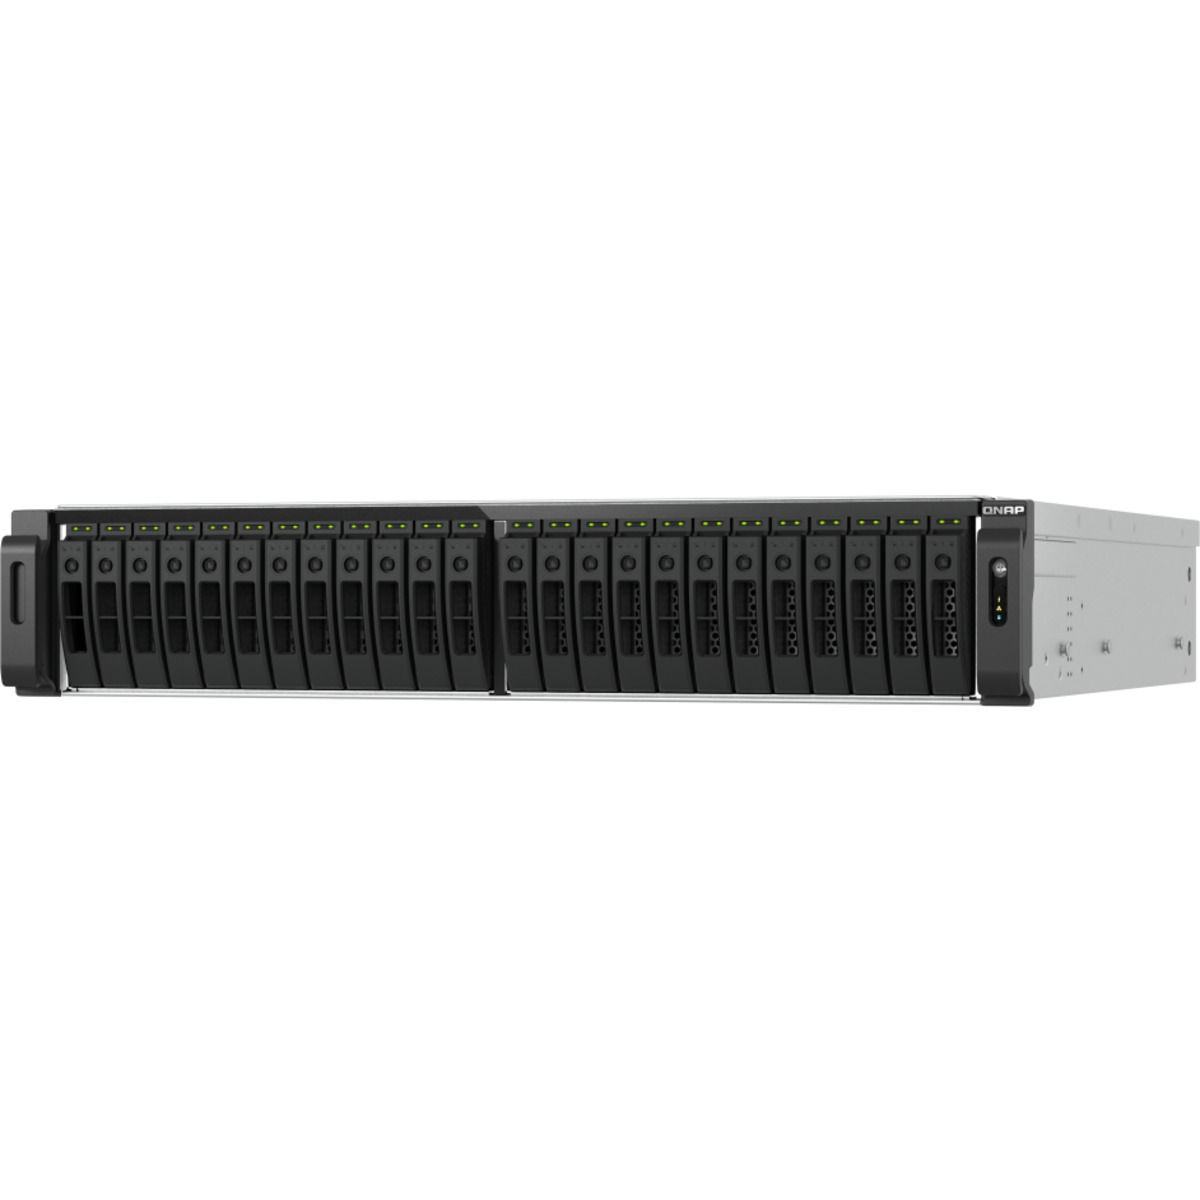 buy QNAP TS-h3077AFU Ryzen 7 All-Flash ZFS 30tb RackMount NAS - Network Attached Storage Device 30x1000gb Samsung 870 EVO MZ-77E1T0BAM 2.5 560/530MB/s SATA 6Gb/s SSD CONSUMER Class Drives Installed - Burn-In Tested - nas headquarters buy network attached storage server device das new raid-5 free shipping usa spring sale TS-h3077AFU Ryzen 7 All-Flash ZFS